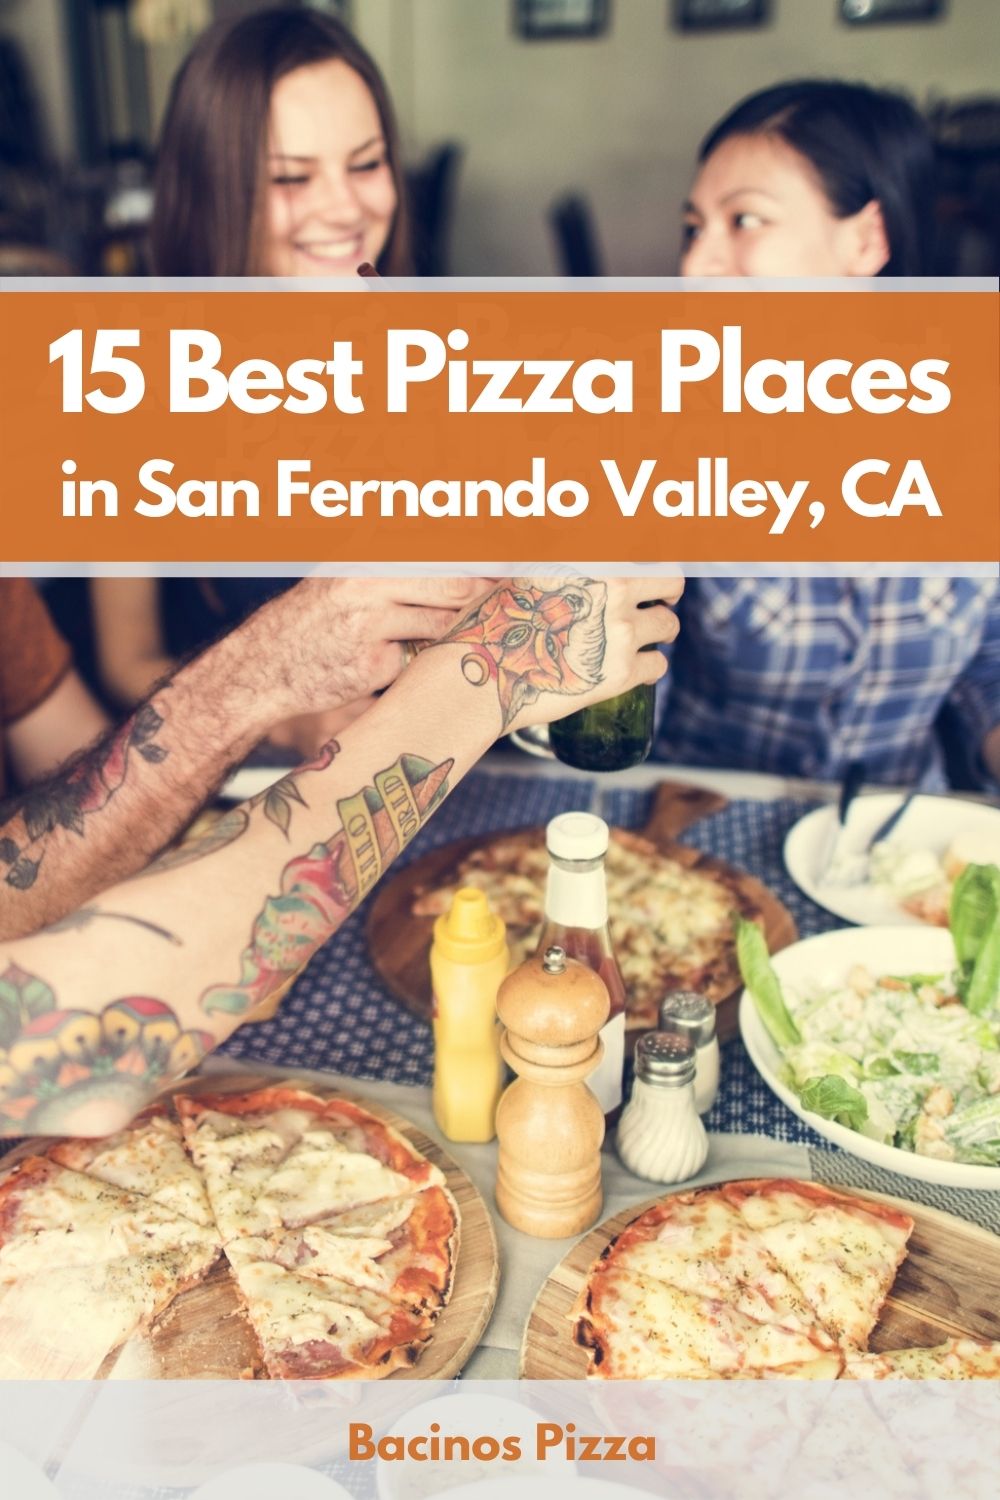 15 Best Pizza Places in San Fernando Valley, CA pin 2